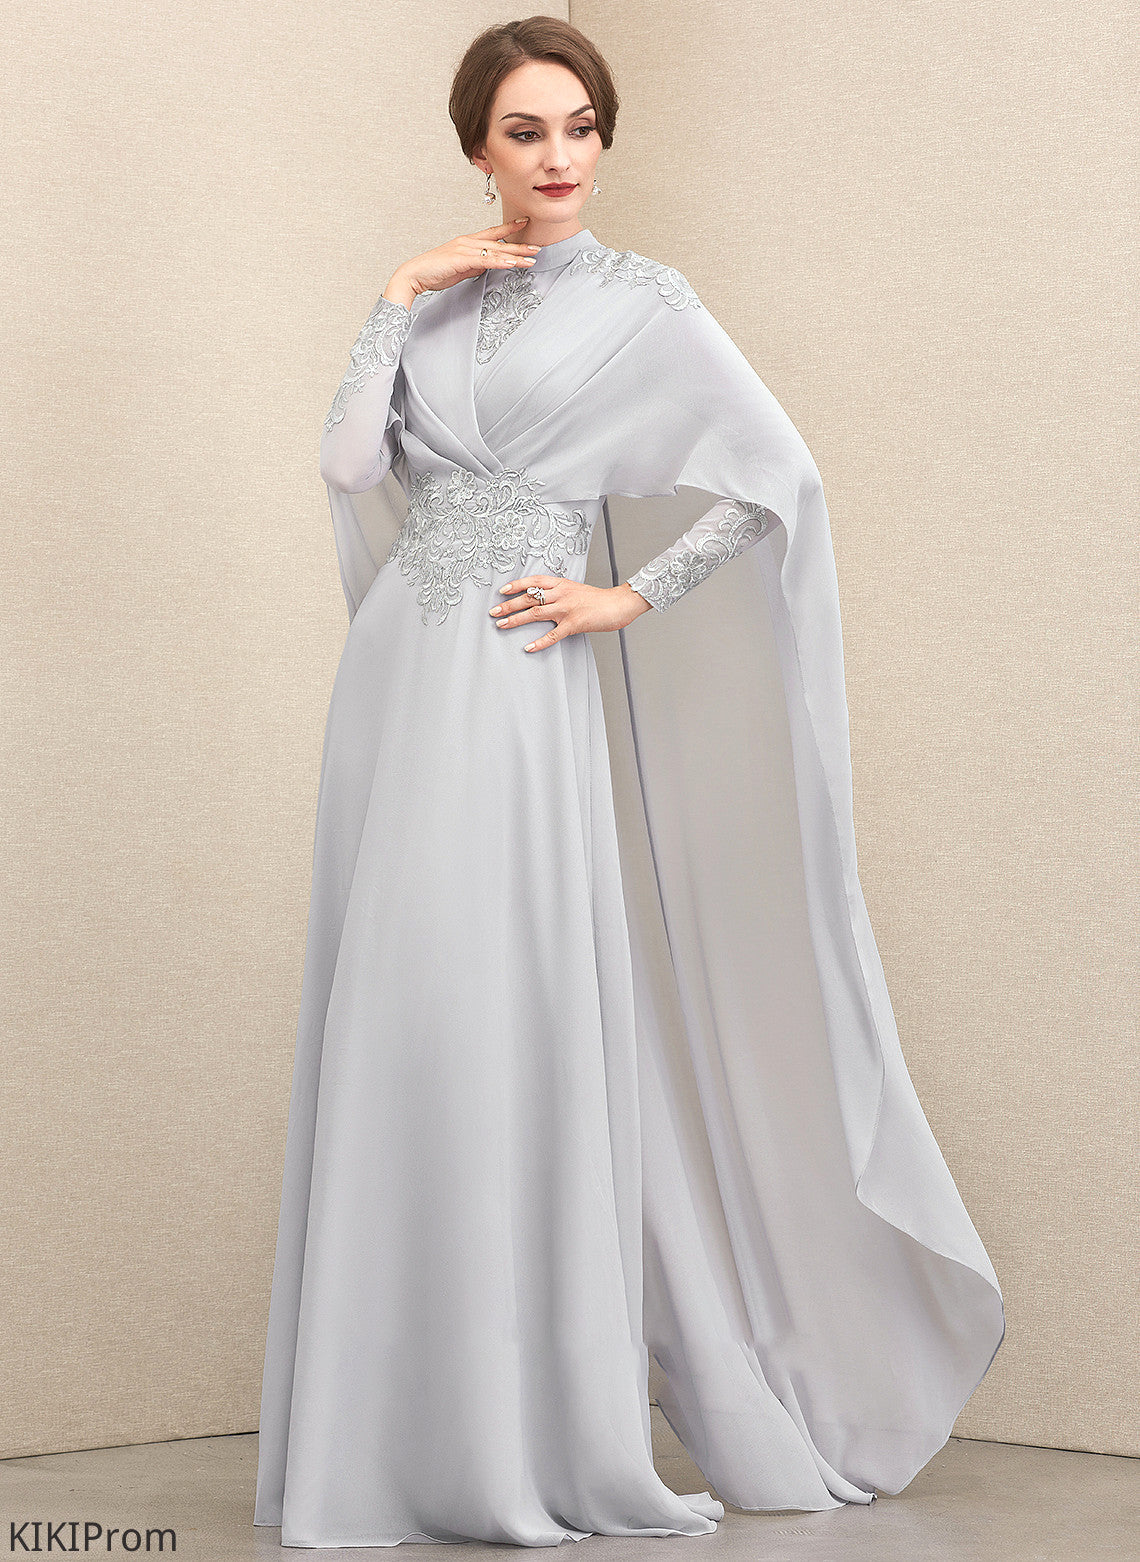 Mother of the Bride Dresses Mother A-Line Chiffon High With Neck of Lace Dress Ruffle Floor-Length the Muriel Bride